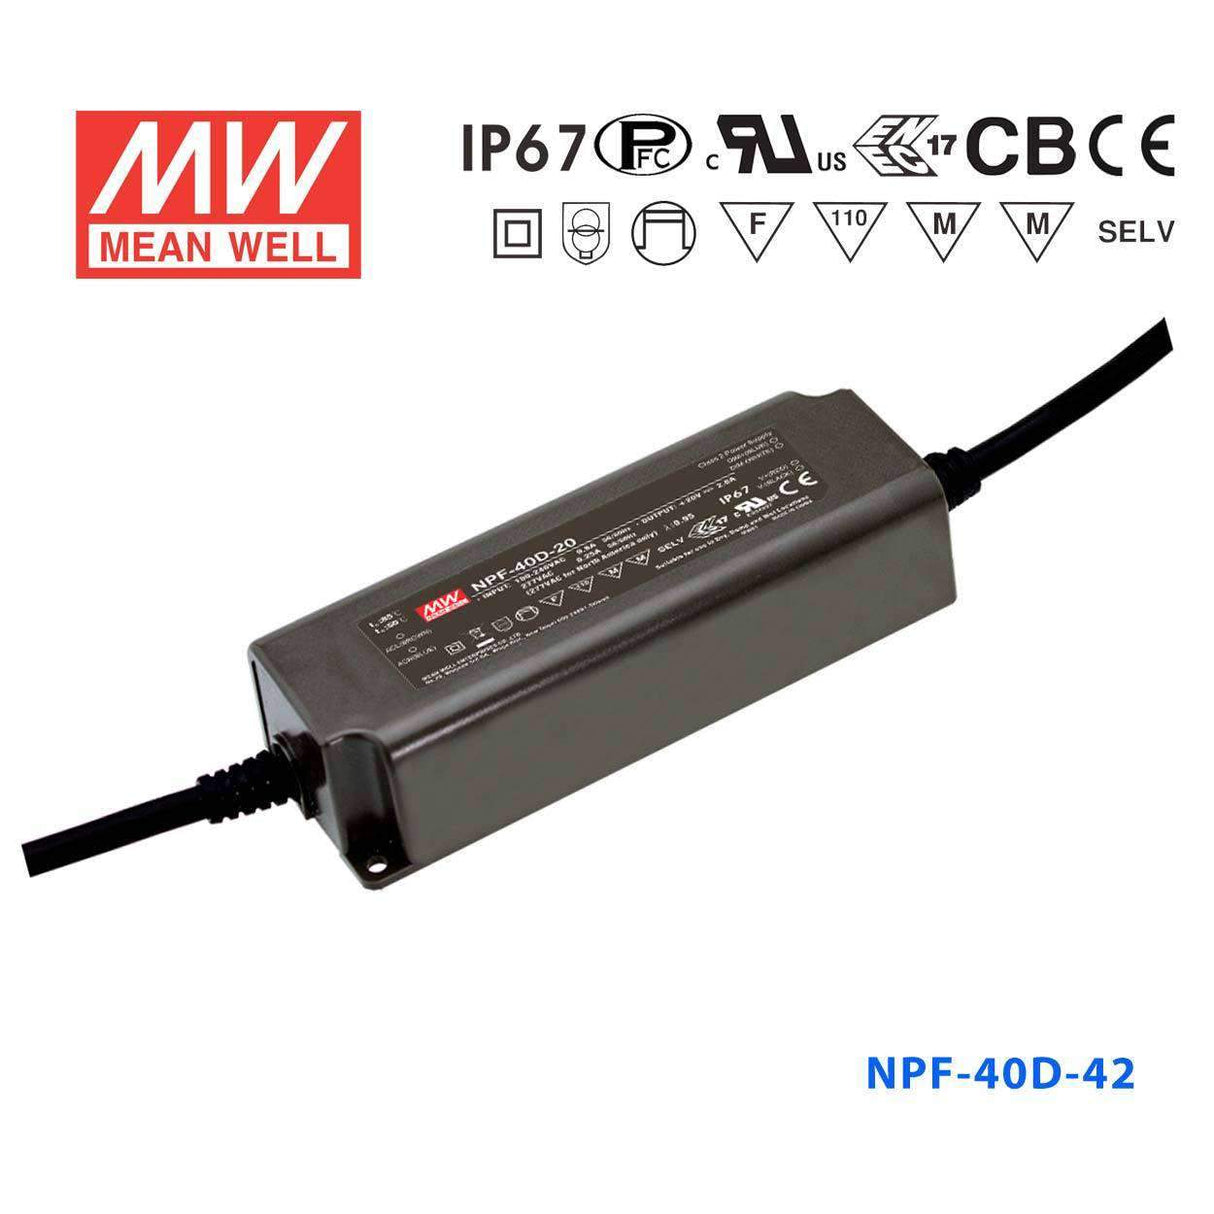 Mean Well NPF-40D-42 Power Supply 40W 42V - Dimmable